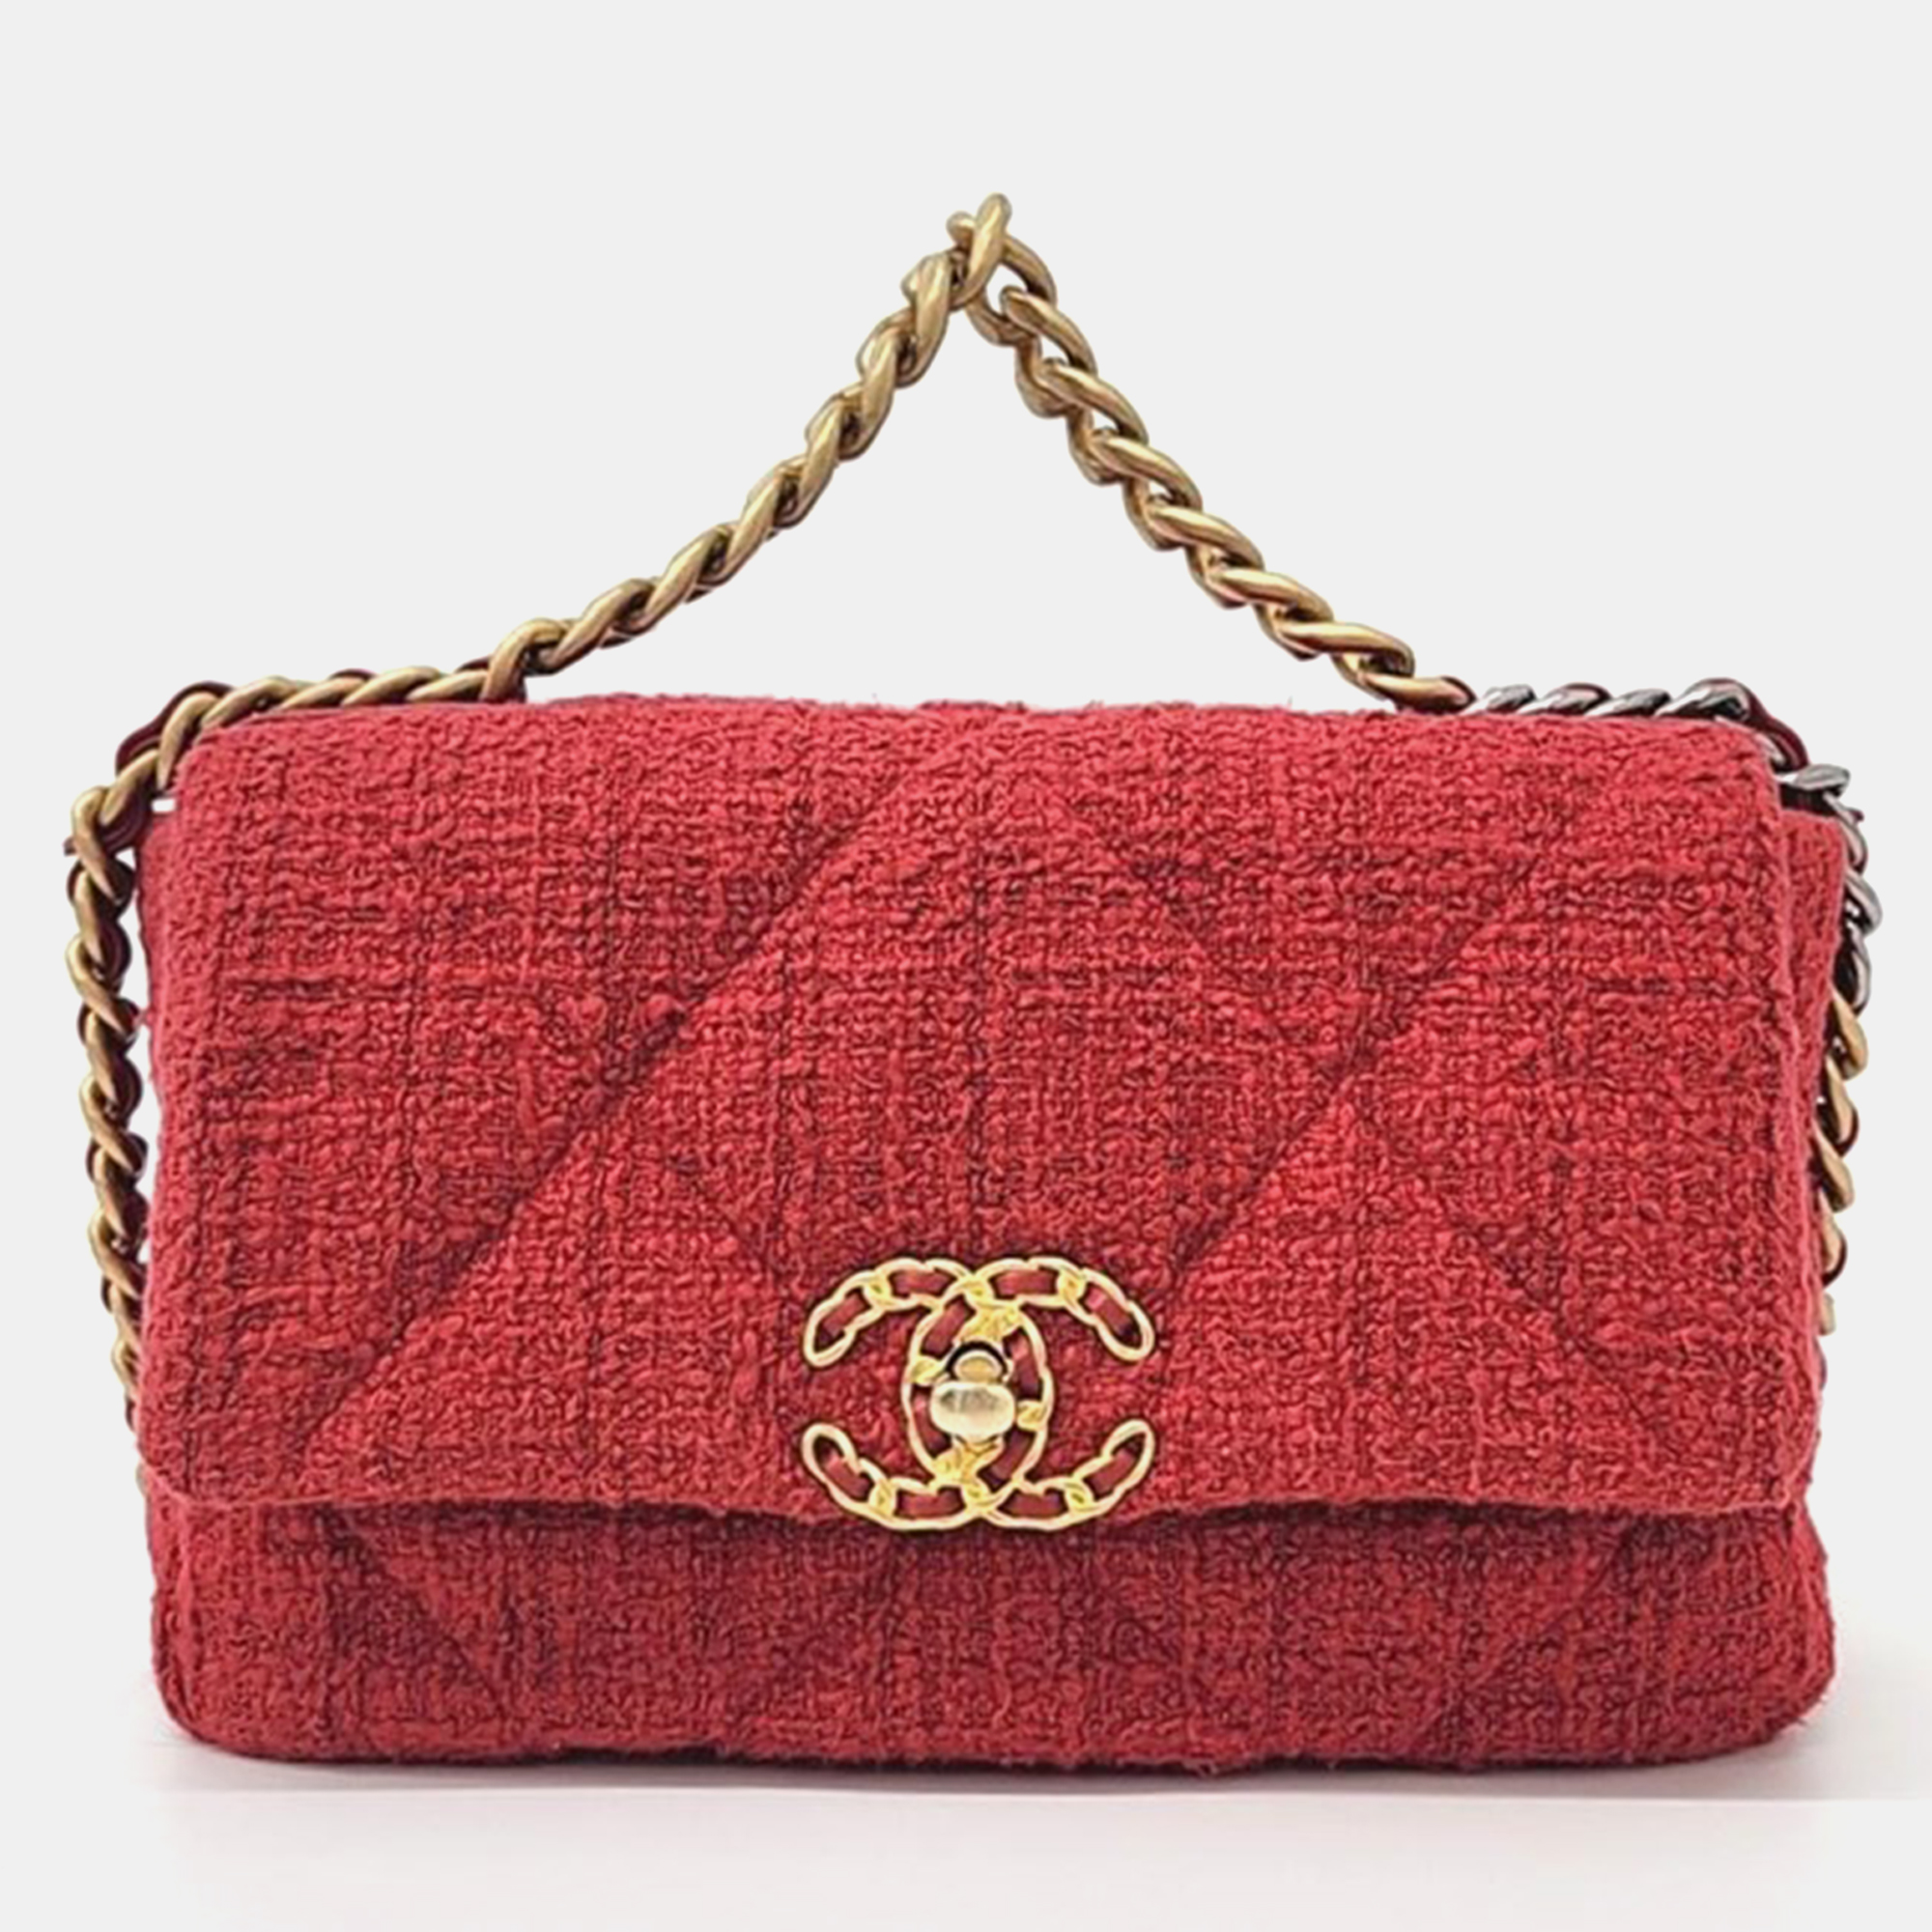 Chanel red tweed 19 small flap bag